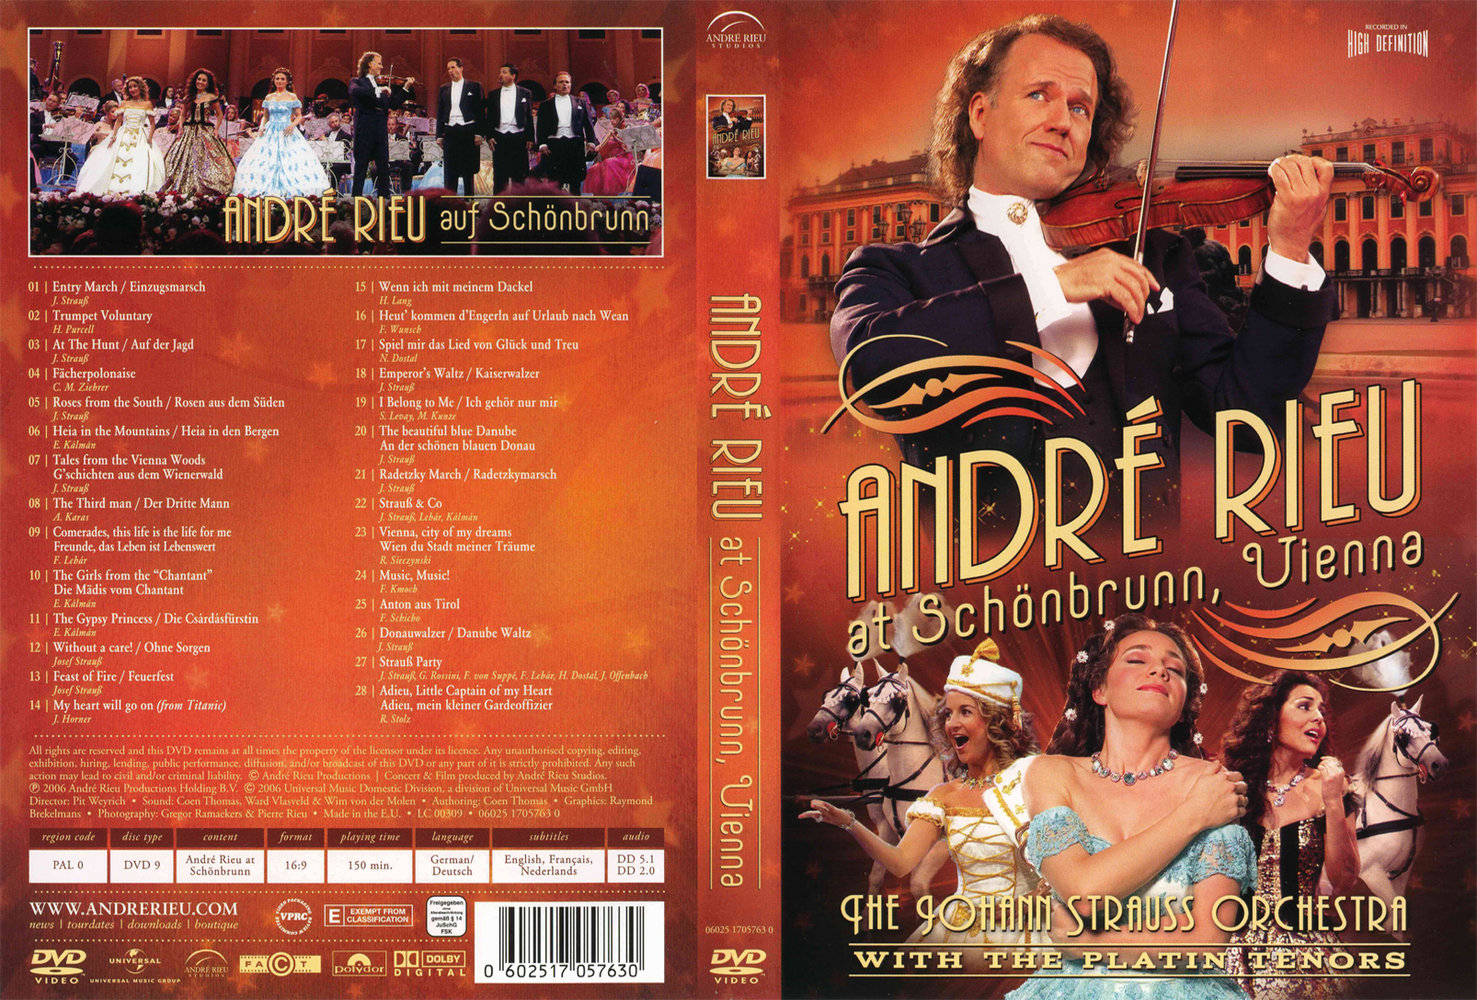 Andre Rieu Live In Vienna